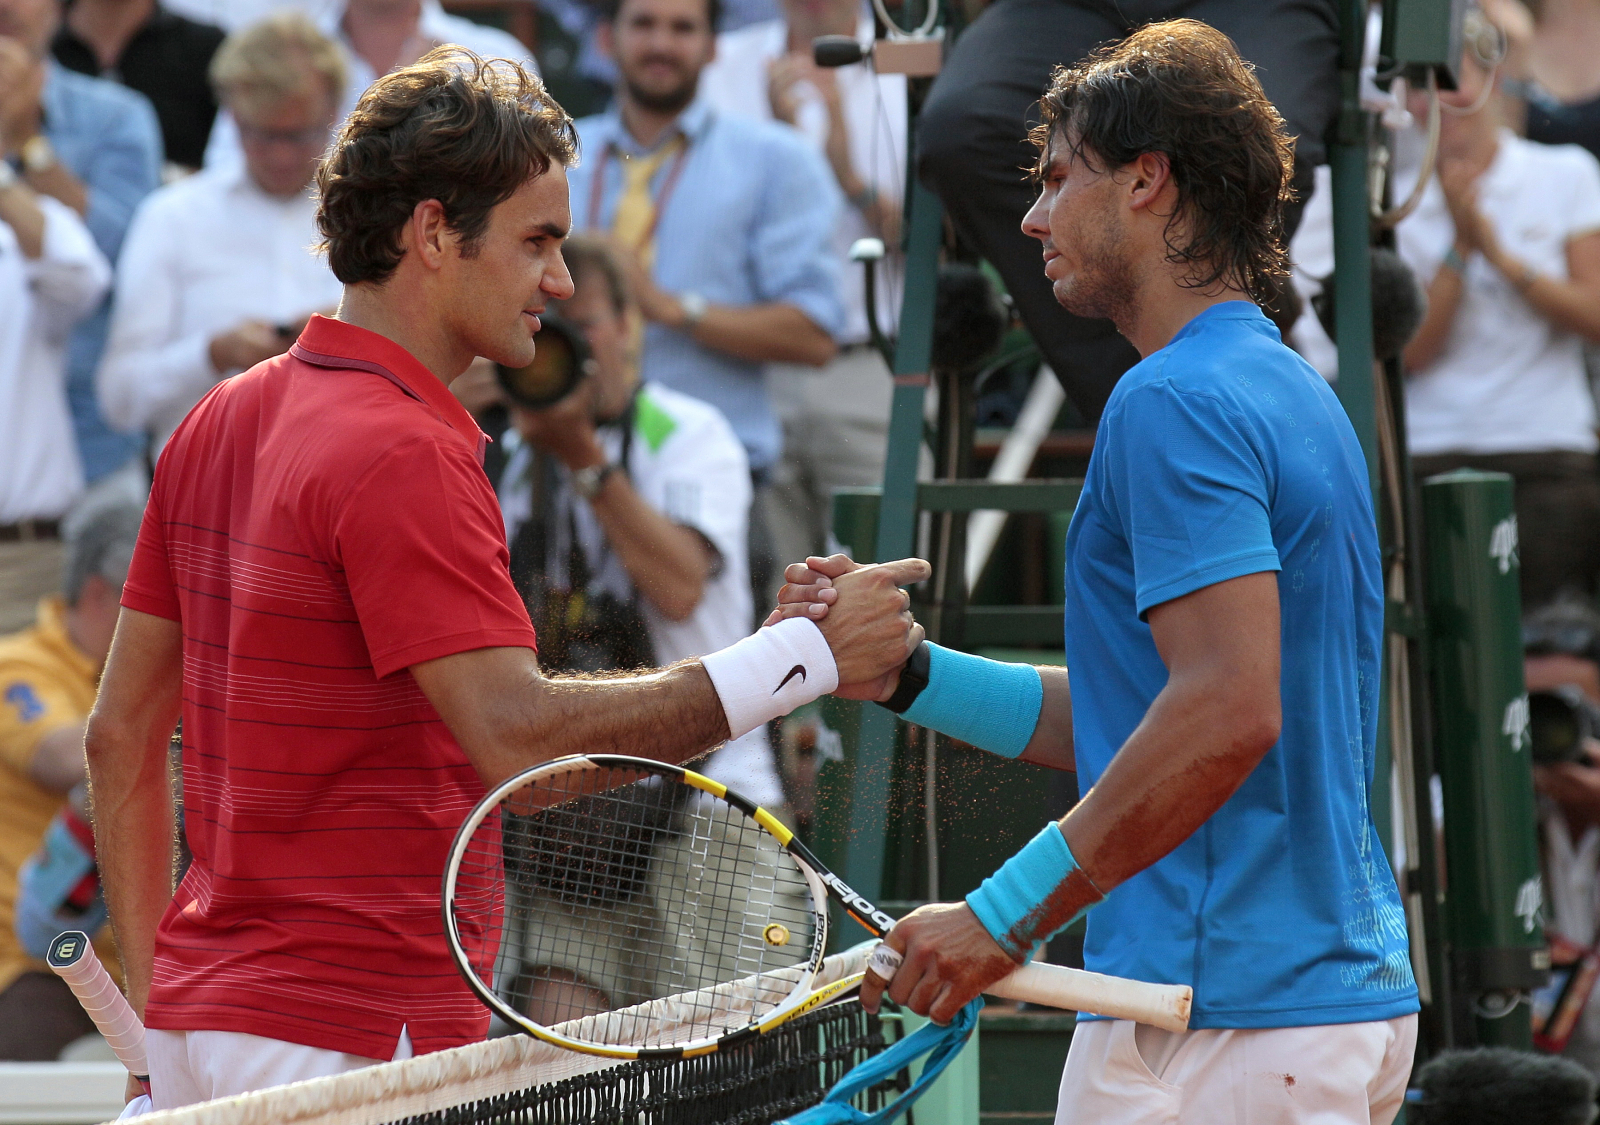 Rafael Nadal vs. Roger Federer French Open Semifinal: What the Experts Say